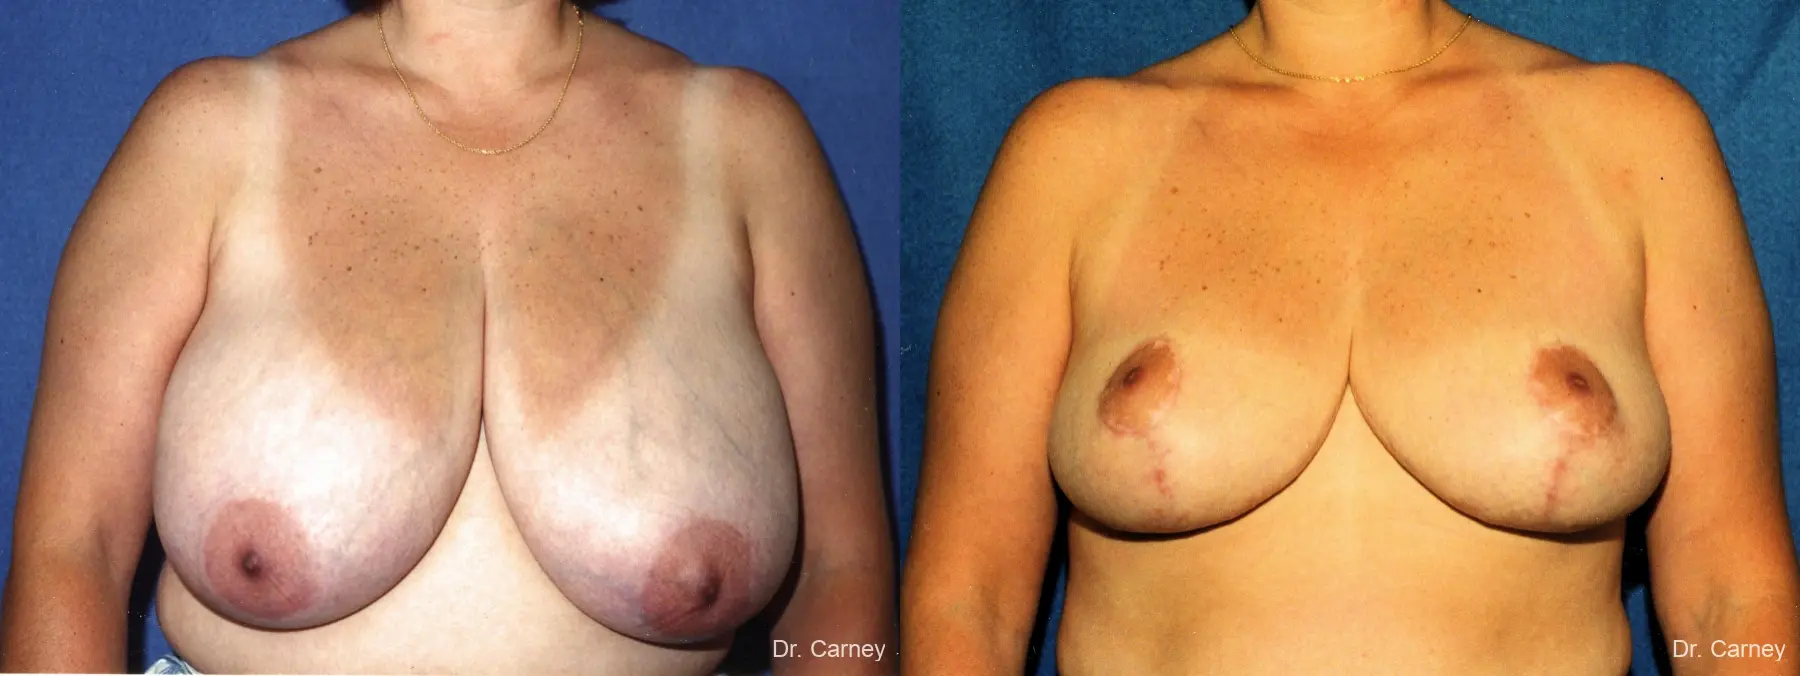 Virginia Beach Breast Reduction 1229 - Before and After